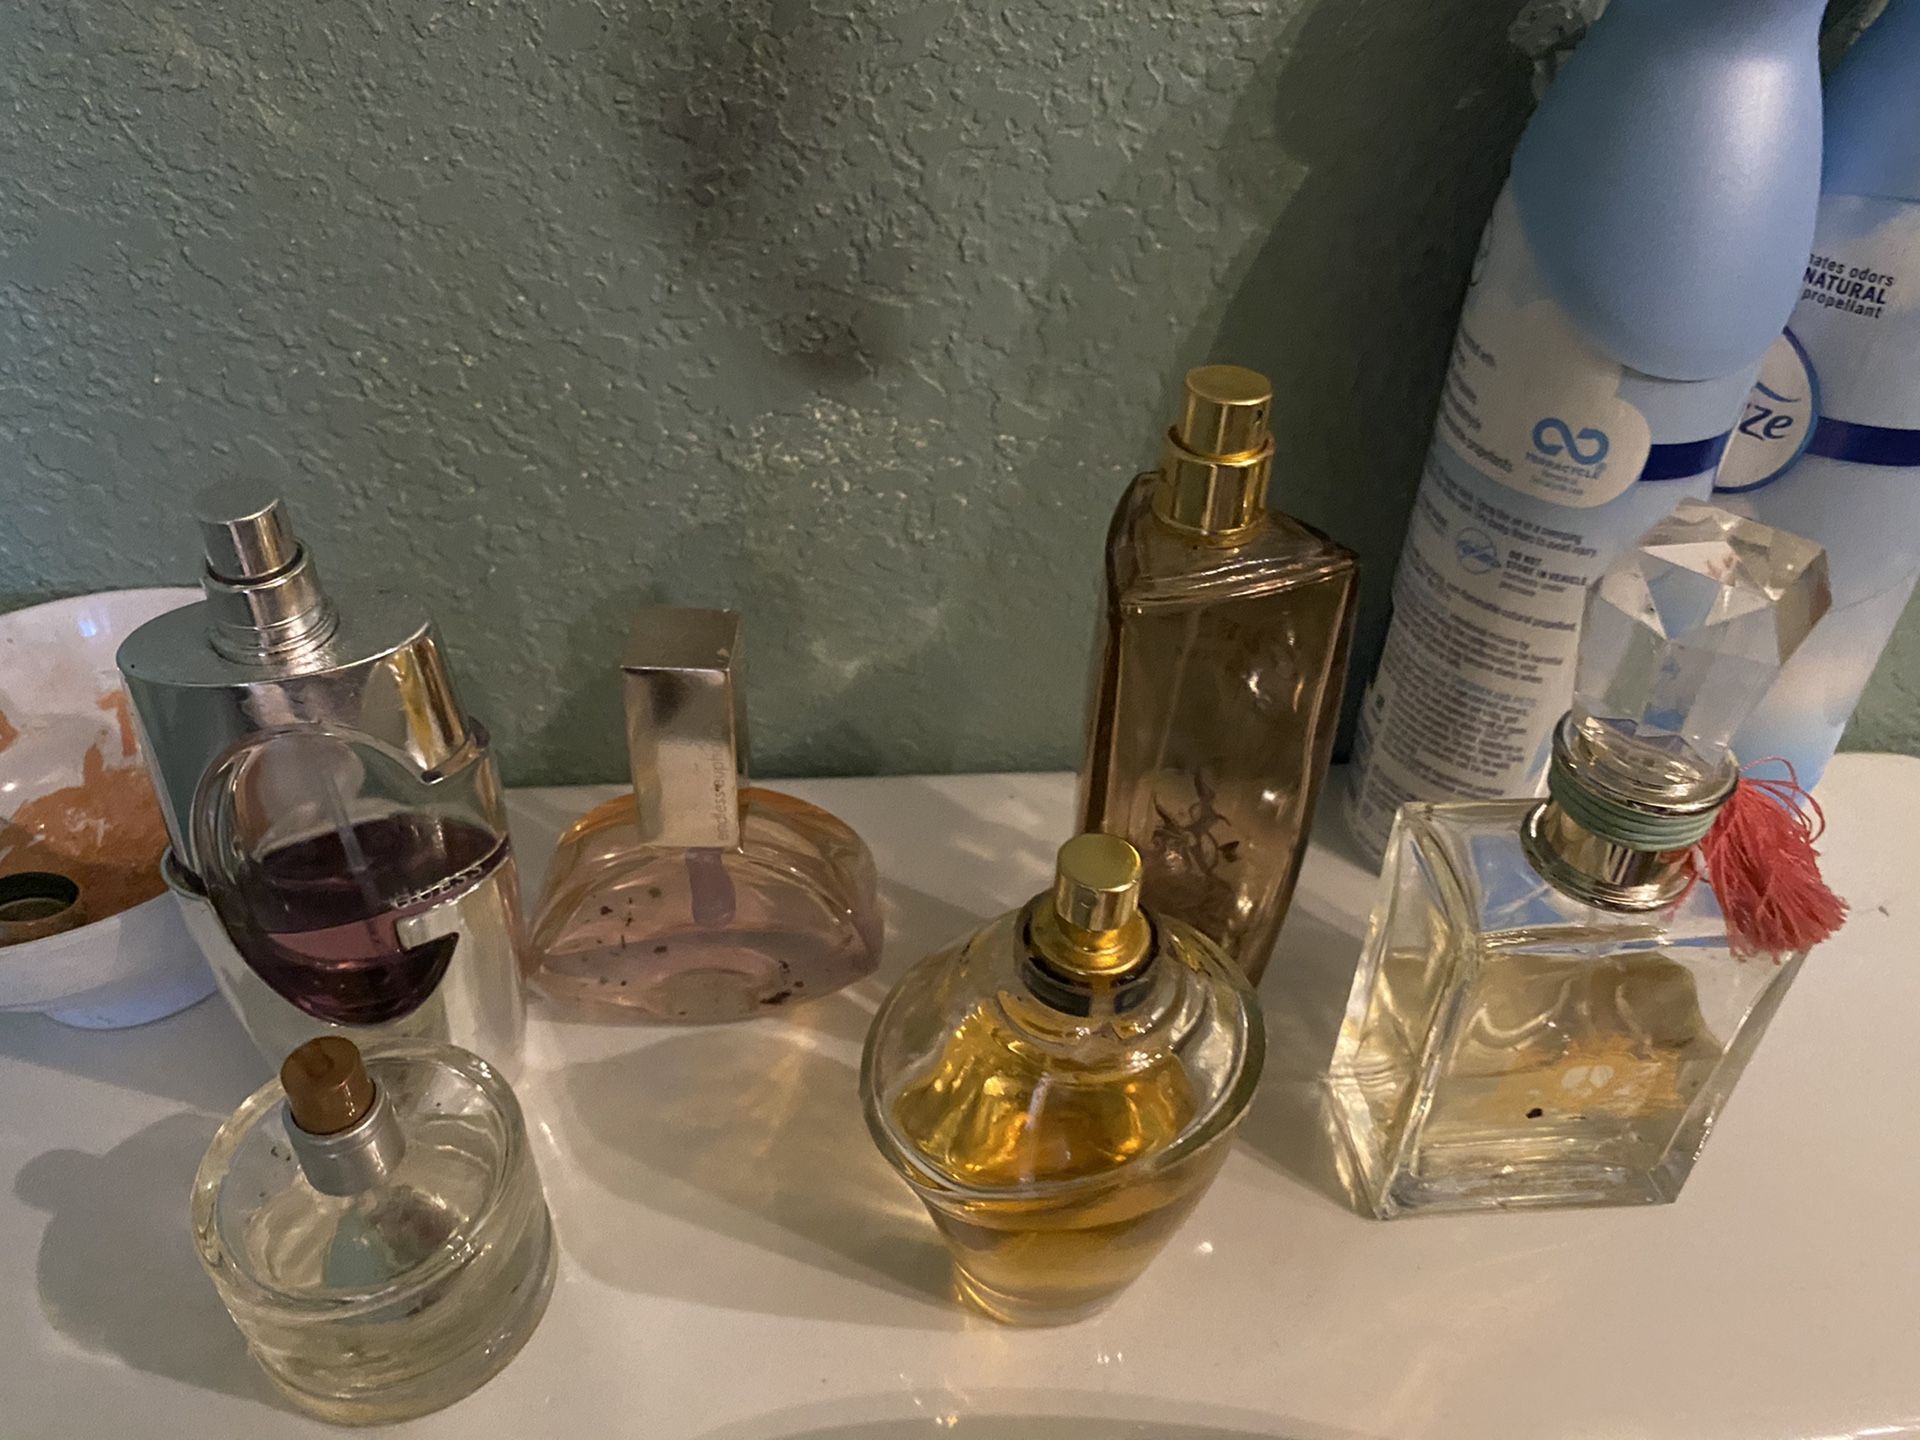 Woman’s perfume one like new others half serious interested just Calvin Klein cost like $70 please make a good offer for all